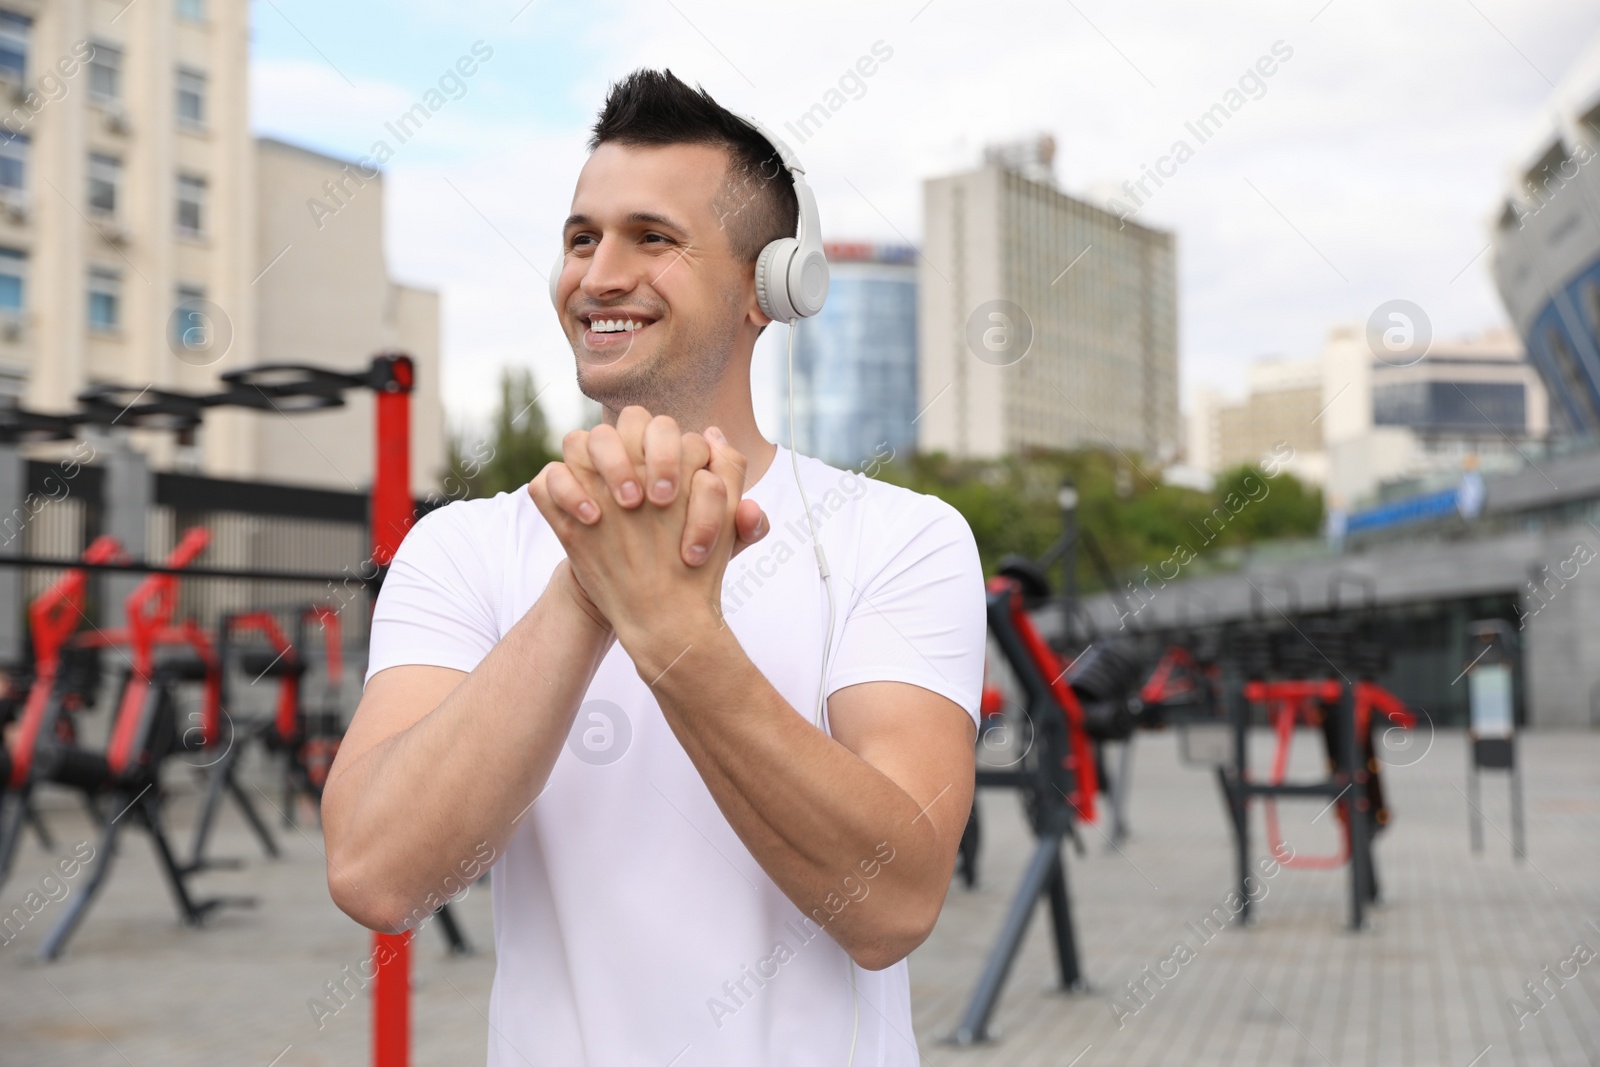 Photo of Man with headphones doing fitness exercise in morning near outdoor gym